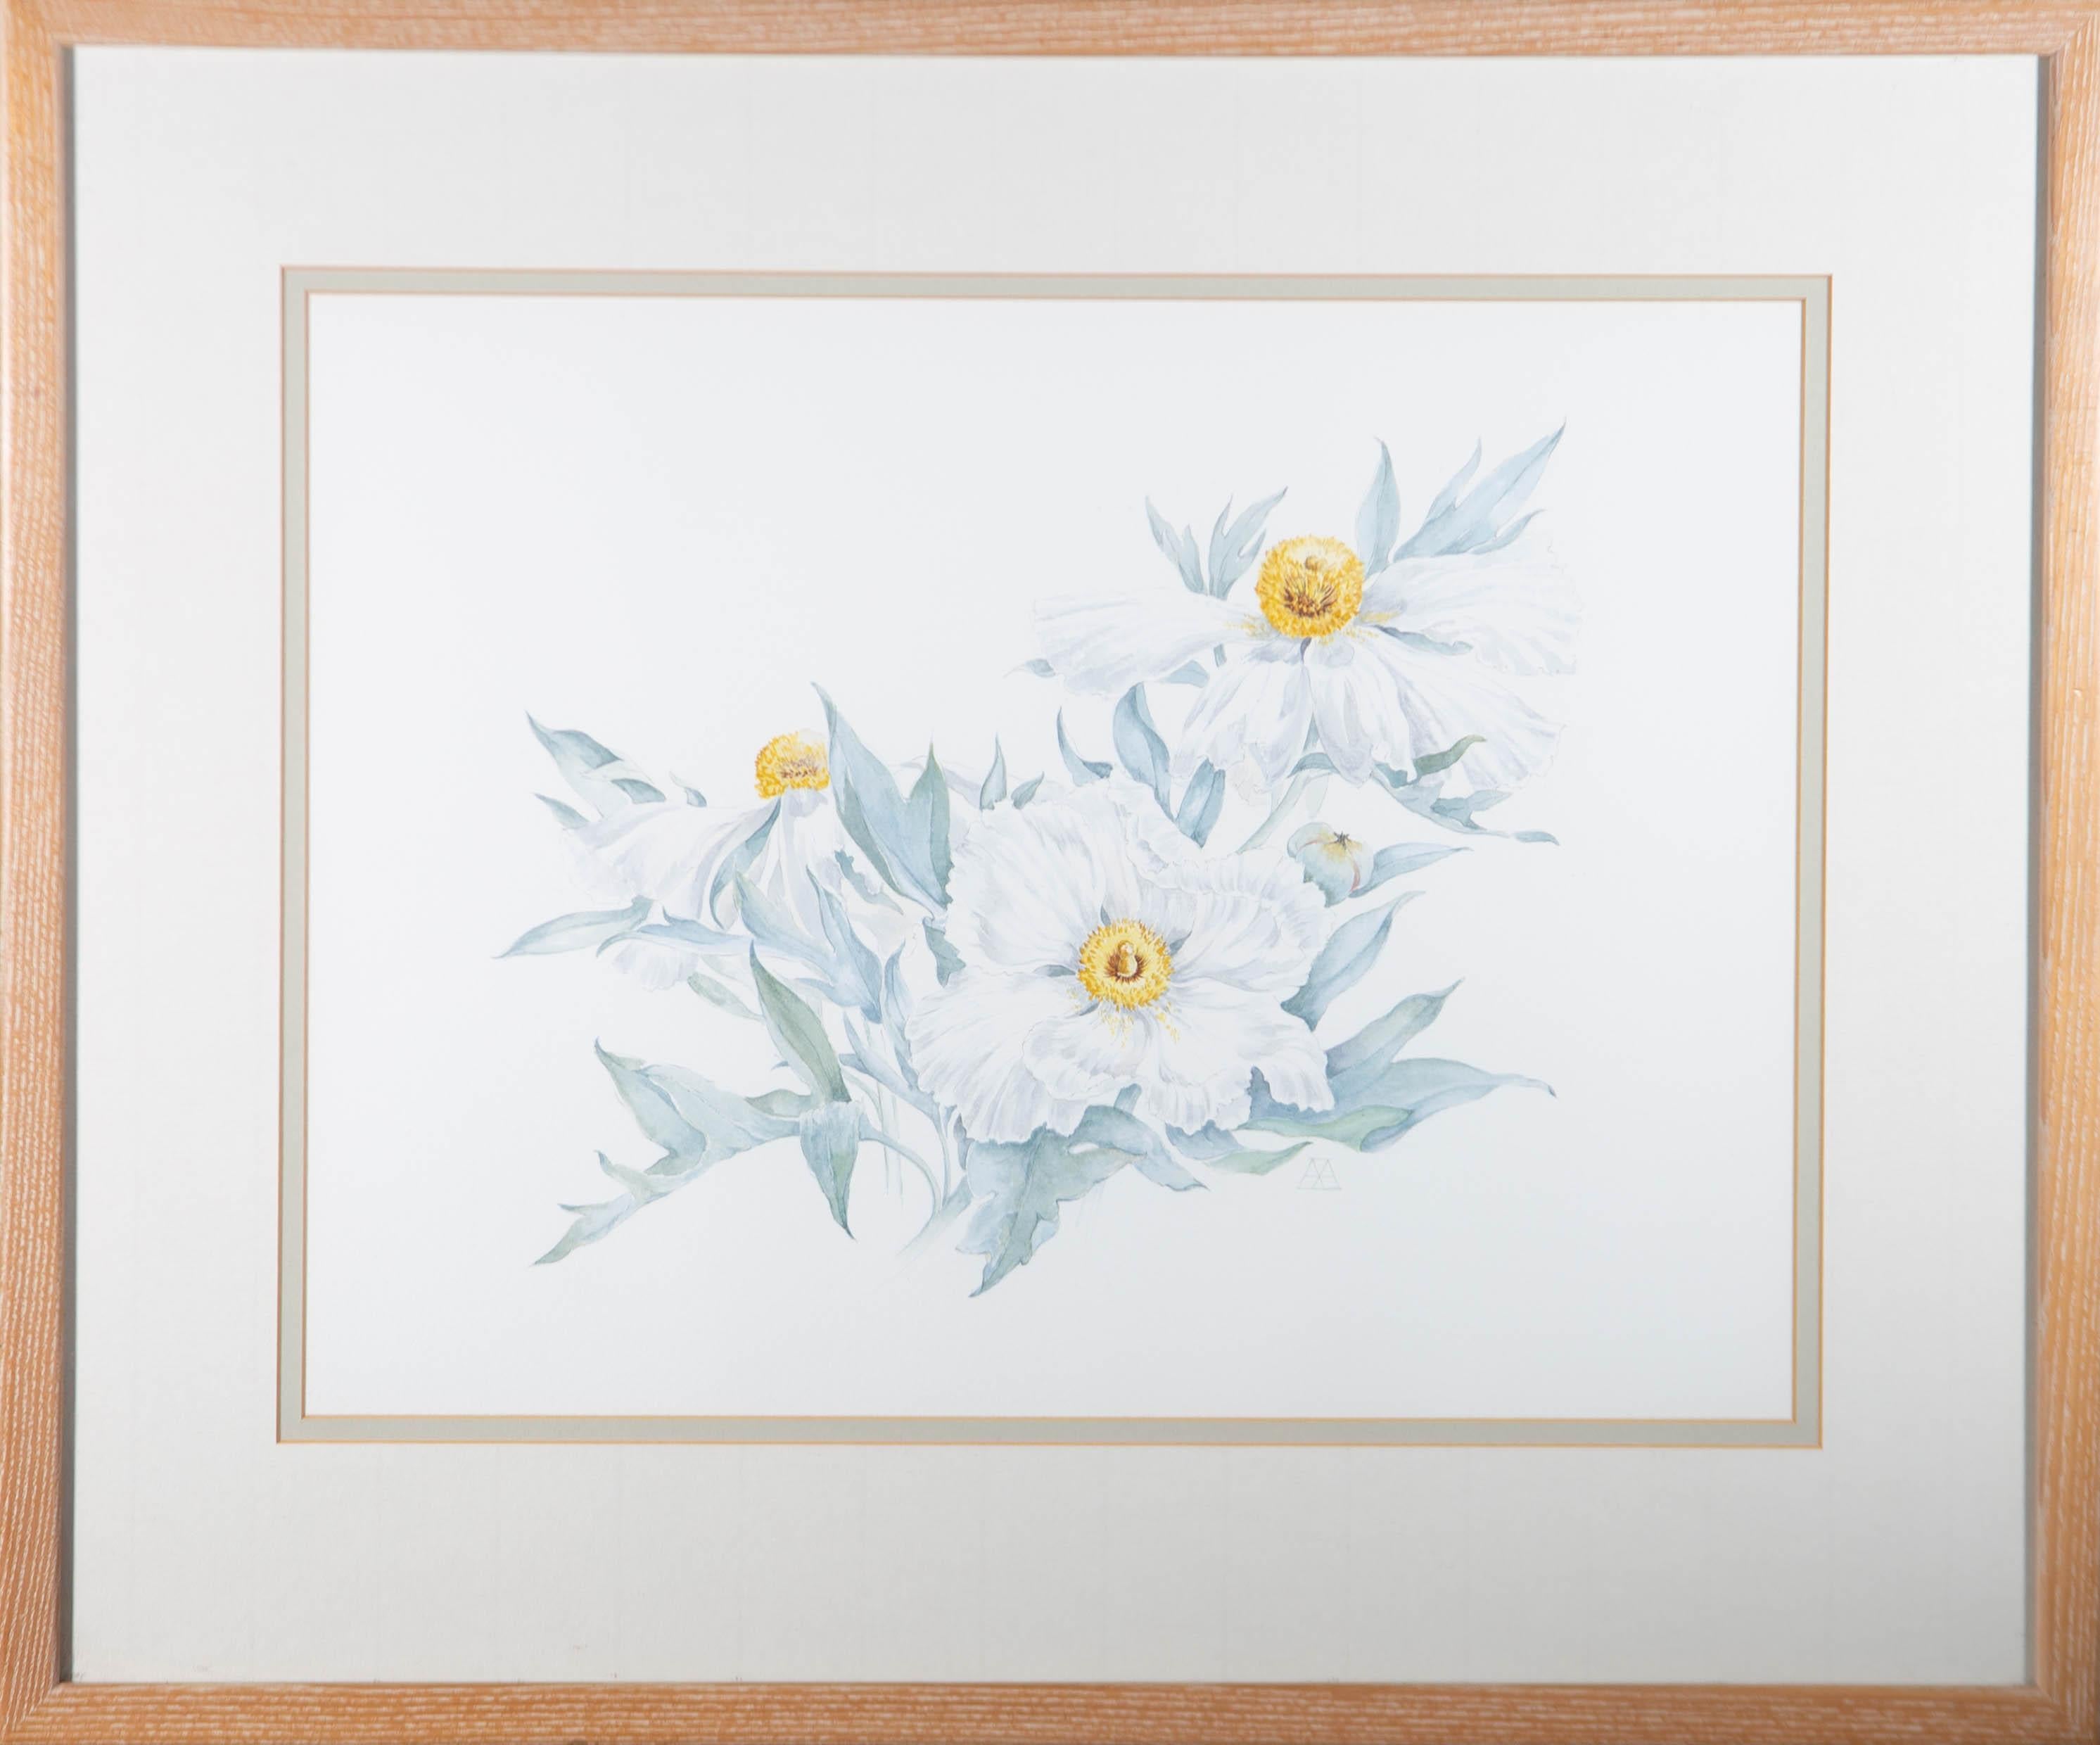 A delicate watercolour of three Romneya Coulteri flowers and one in bud, commonly known as the Coulter's Matilija poppy or California tree poppy. Well-presented in a double card mount with green inner and limed wooden frame. Monogrammed to the